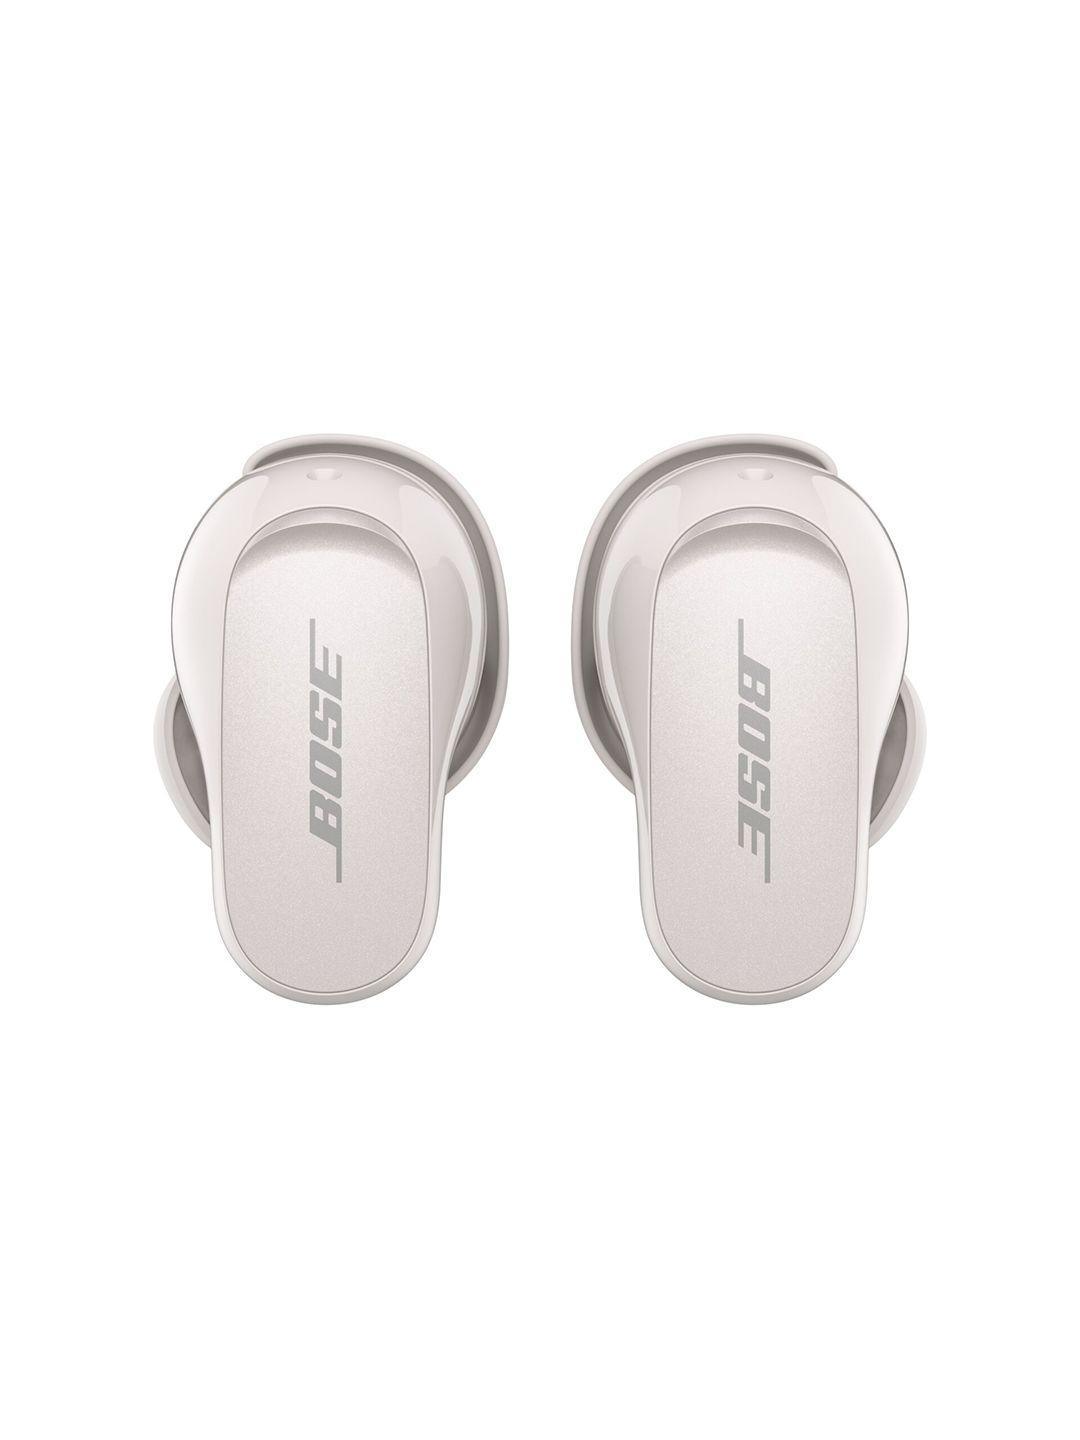 bose quiet comfort wireless noise cancelling in-ear earbuds